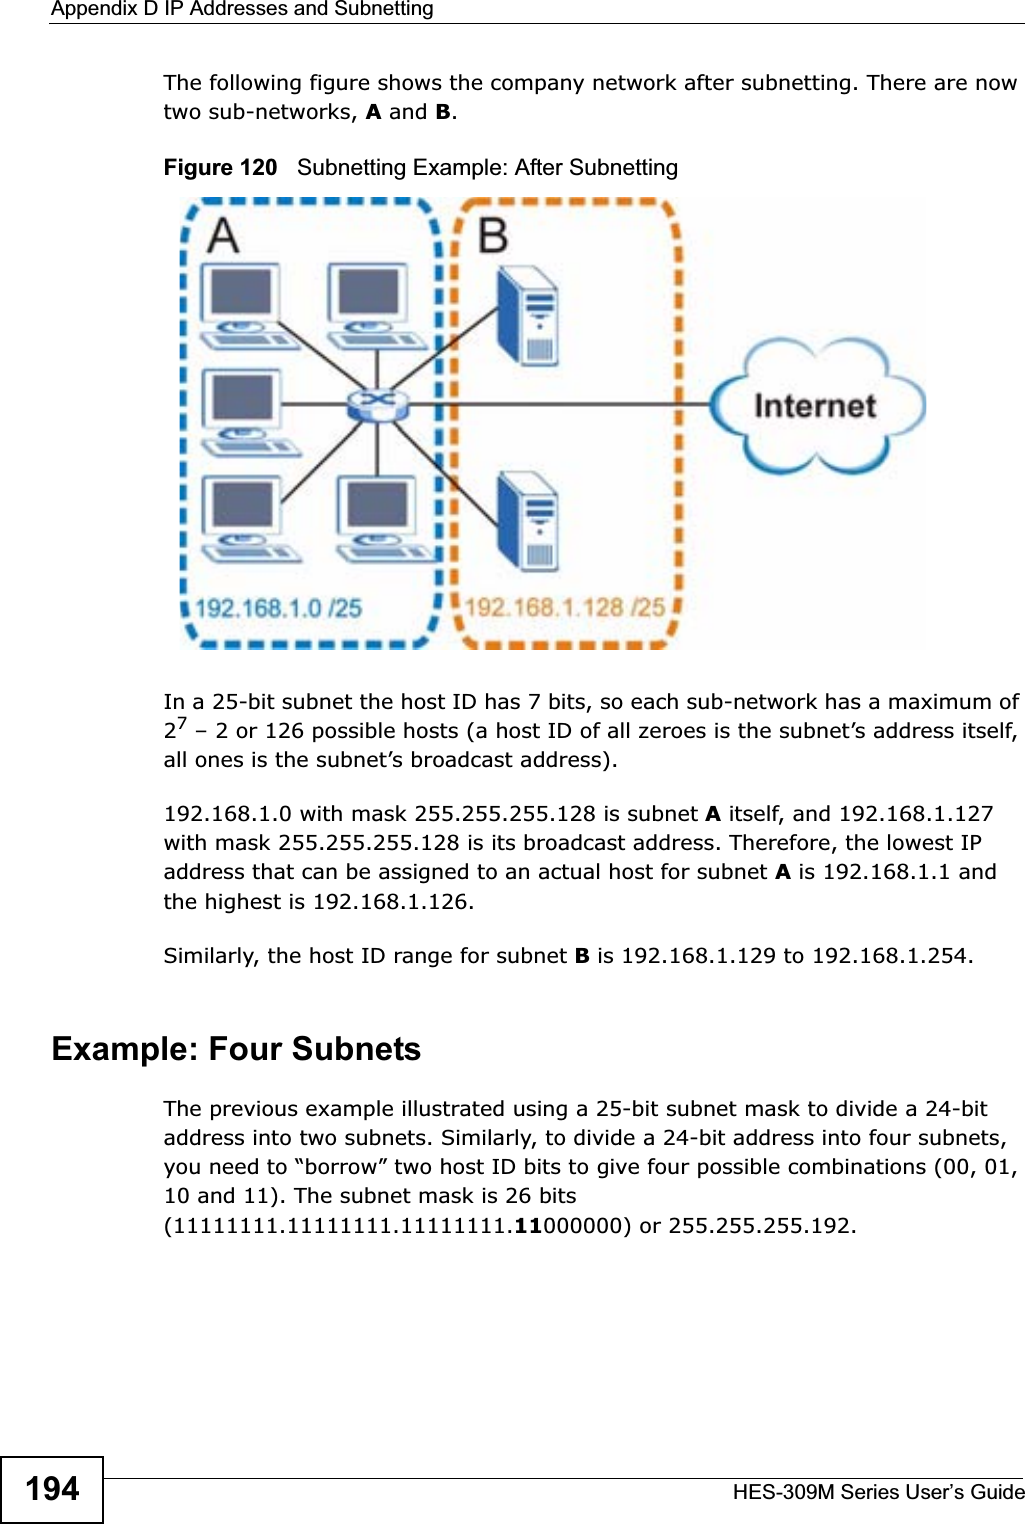 Appendix D IP Addresses and SubnettingHES-309M Series User’s Guide194The following figure shows the company network after subnetting. There are now two sub-networks, A and B.Figure 120   Subnetting Example: After SubnettingIn a 25-bit subnet the host ID has 7 bits, so each sub-network has a maximum of 27 – 2 or 126 possible hosts (a host ID of all zeroes is the subnet’s address itself, all ones is the subnet’s broadcast address).192.168.1.0 with mask 255.255.255.128 is subnet A itself, and 192.168.1.127 with mask 255.255.255.128 is its broadcast address. Therefore, the lowest IP address that can be assigned to an actual host for subnet A is 192.168.1.1 and the highest is 192.168.1.126. Similarly, the host ID range for subnet B is 192.168.1.129 to 192.168.1.254.Example: Four Subnets The previous example illustrated using a 25-bit subnet mask to divide a 24-bit address into two subnets. Similarly, to divide a 24-bit address into four subnets, you need to “borrow” two host ID bits to give four possible combinations (00, 01, 10 and 11). The subnet mask is 26 bits (11111111.11111111.11111111.11000000) or 255.255.255.192. 